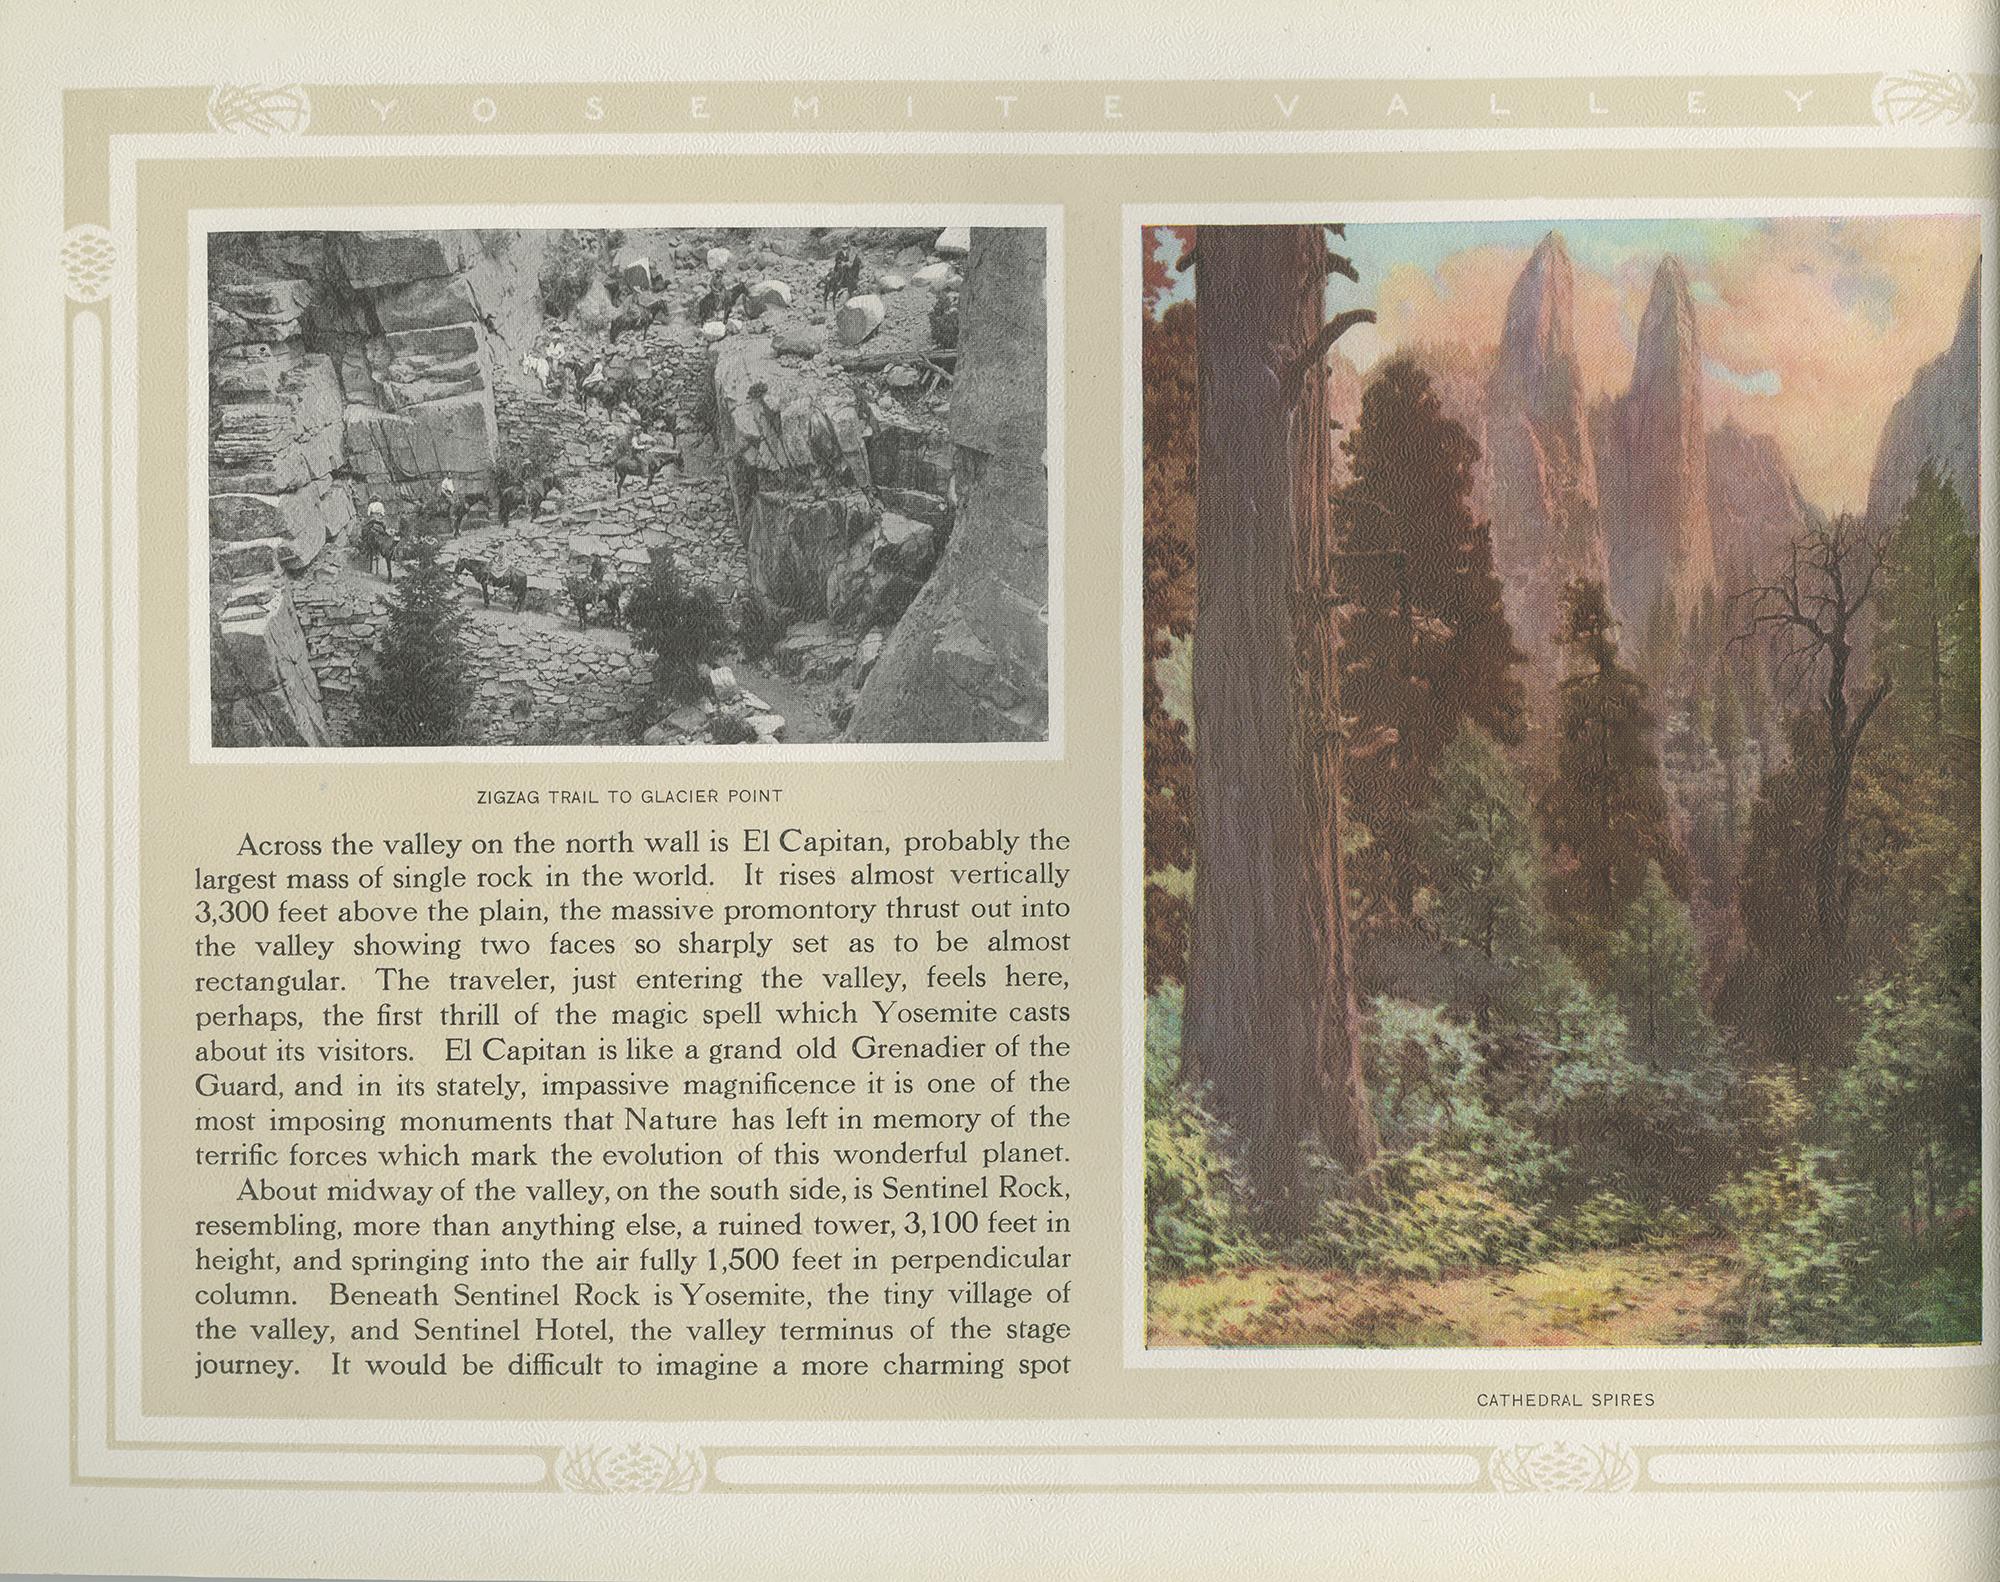 Paper Antique Booklet 'Yosemite National Park' by O.W. Lehmer, 1912